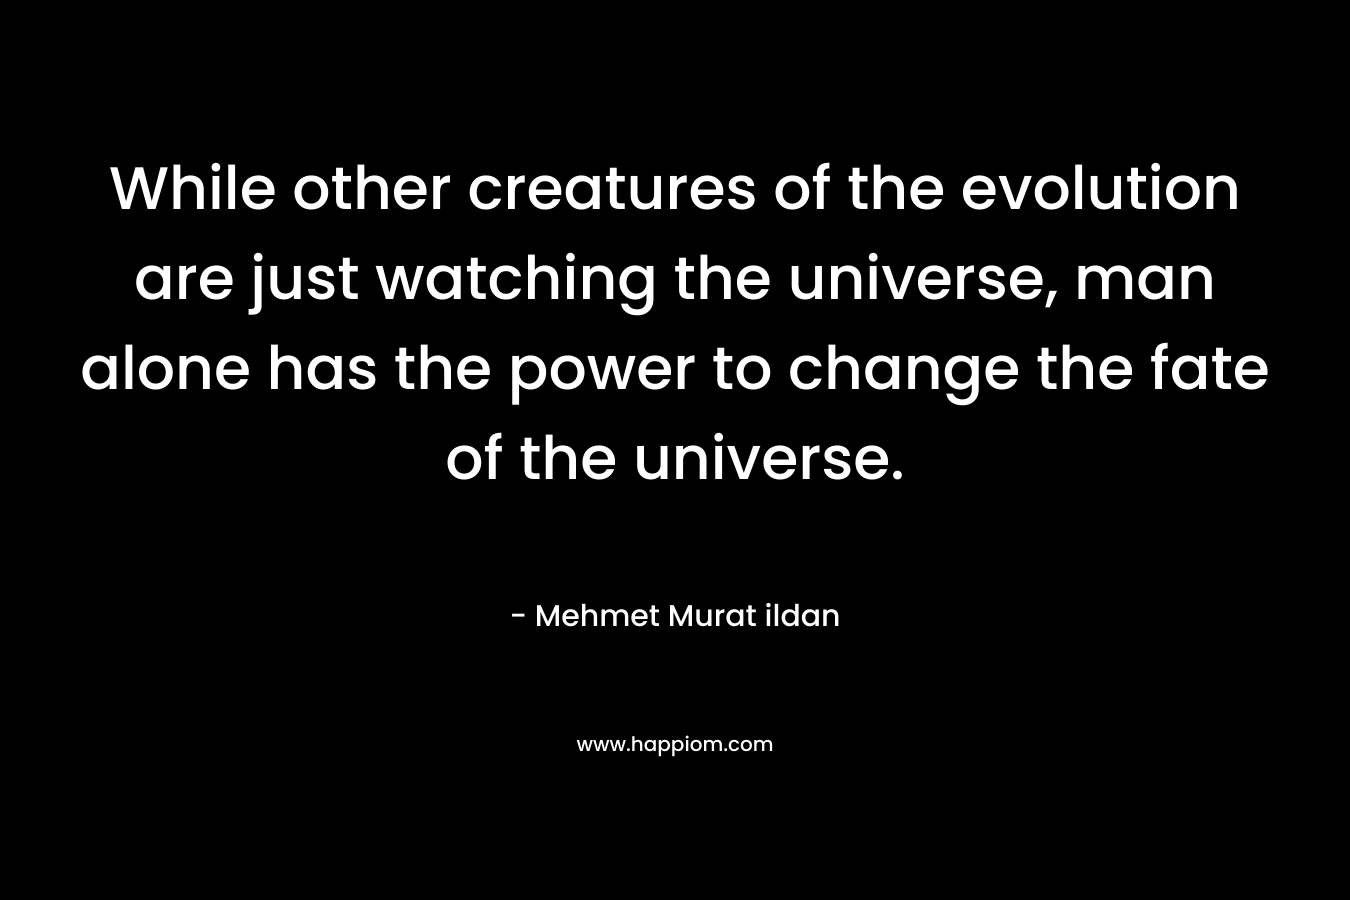 While other creatures of the evolution are just watching the universe, man alone has the power to change the fate of the universe.